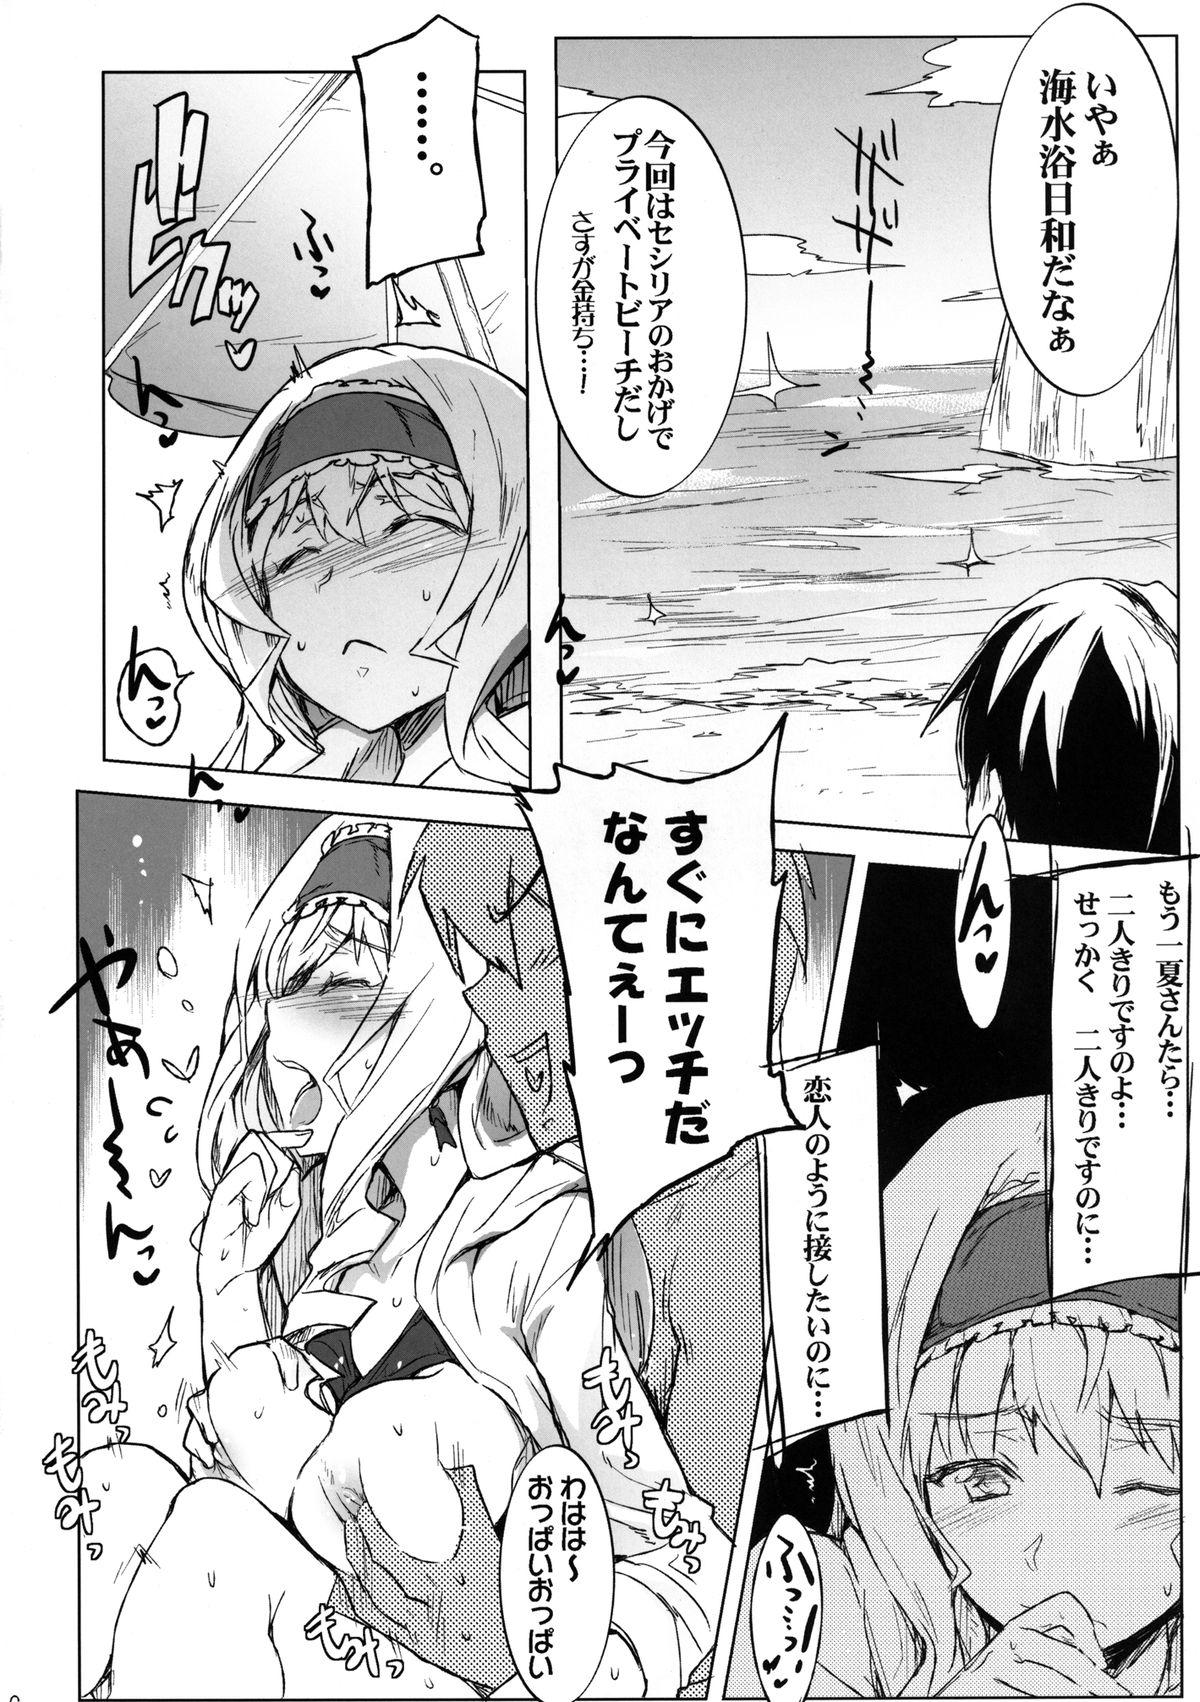 Gapes Gaping Asshole IS Girls 2 - Infinite stratos Foreskin - Page 6